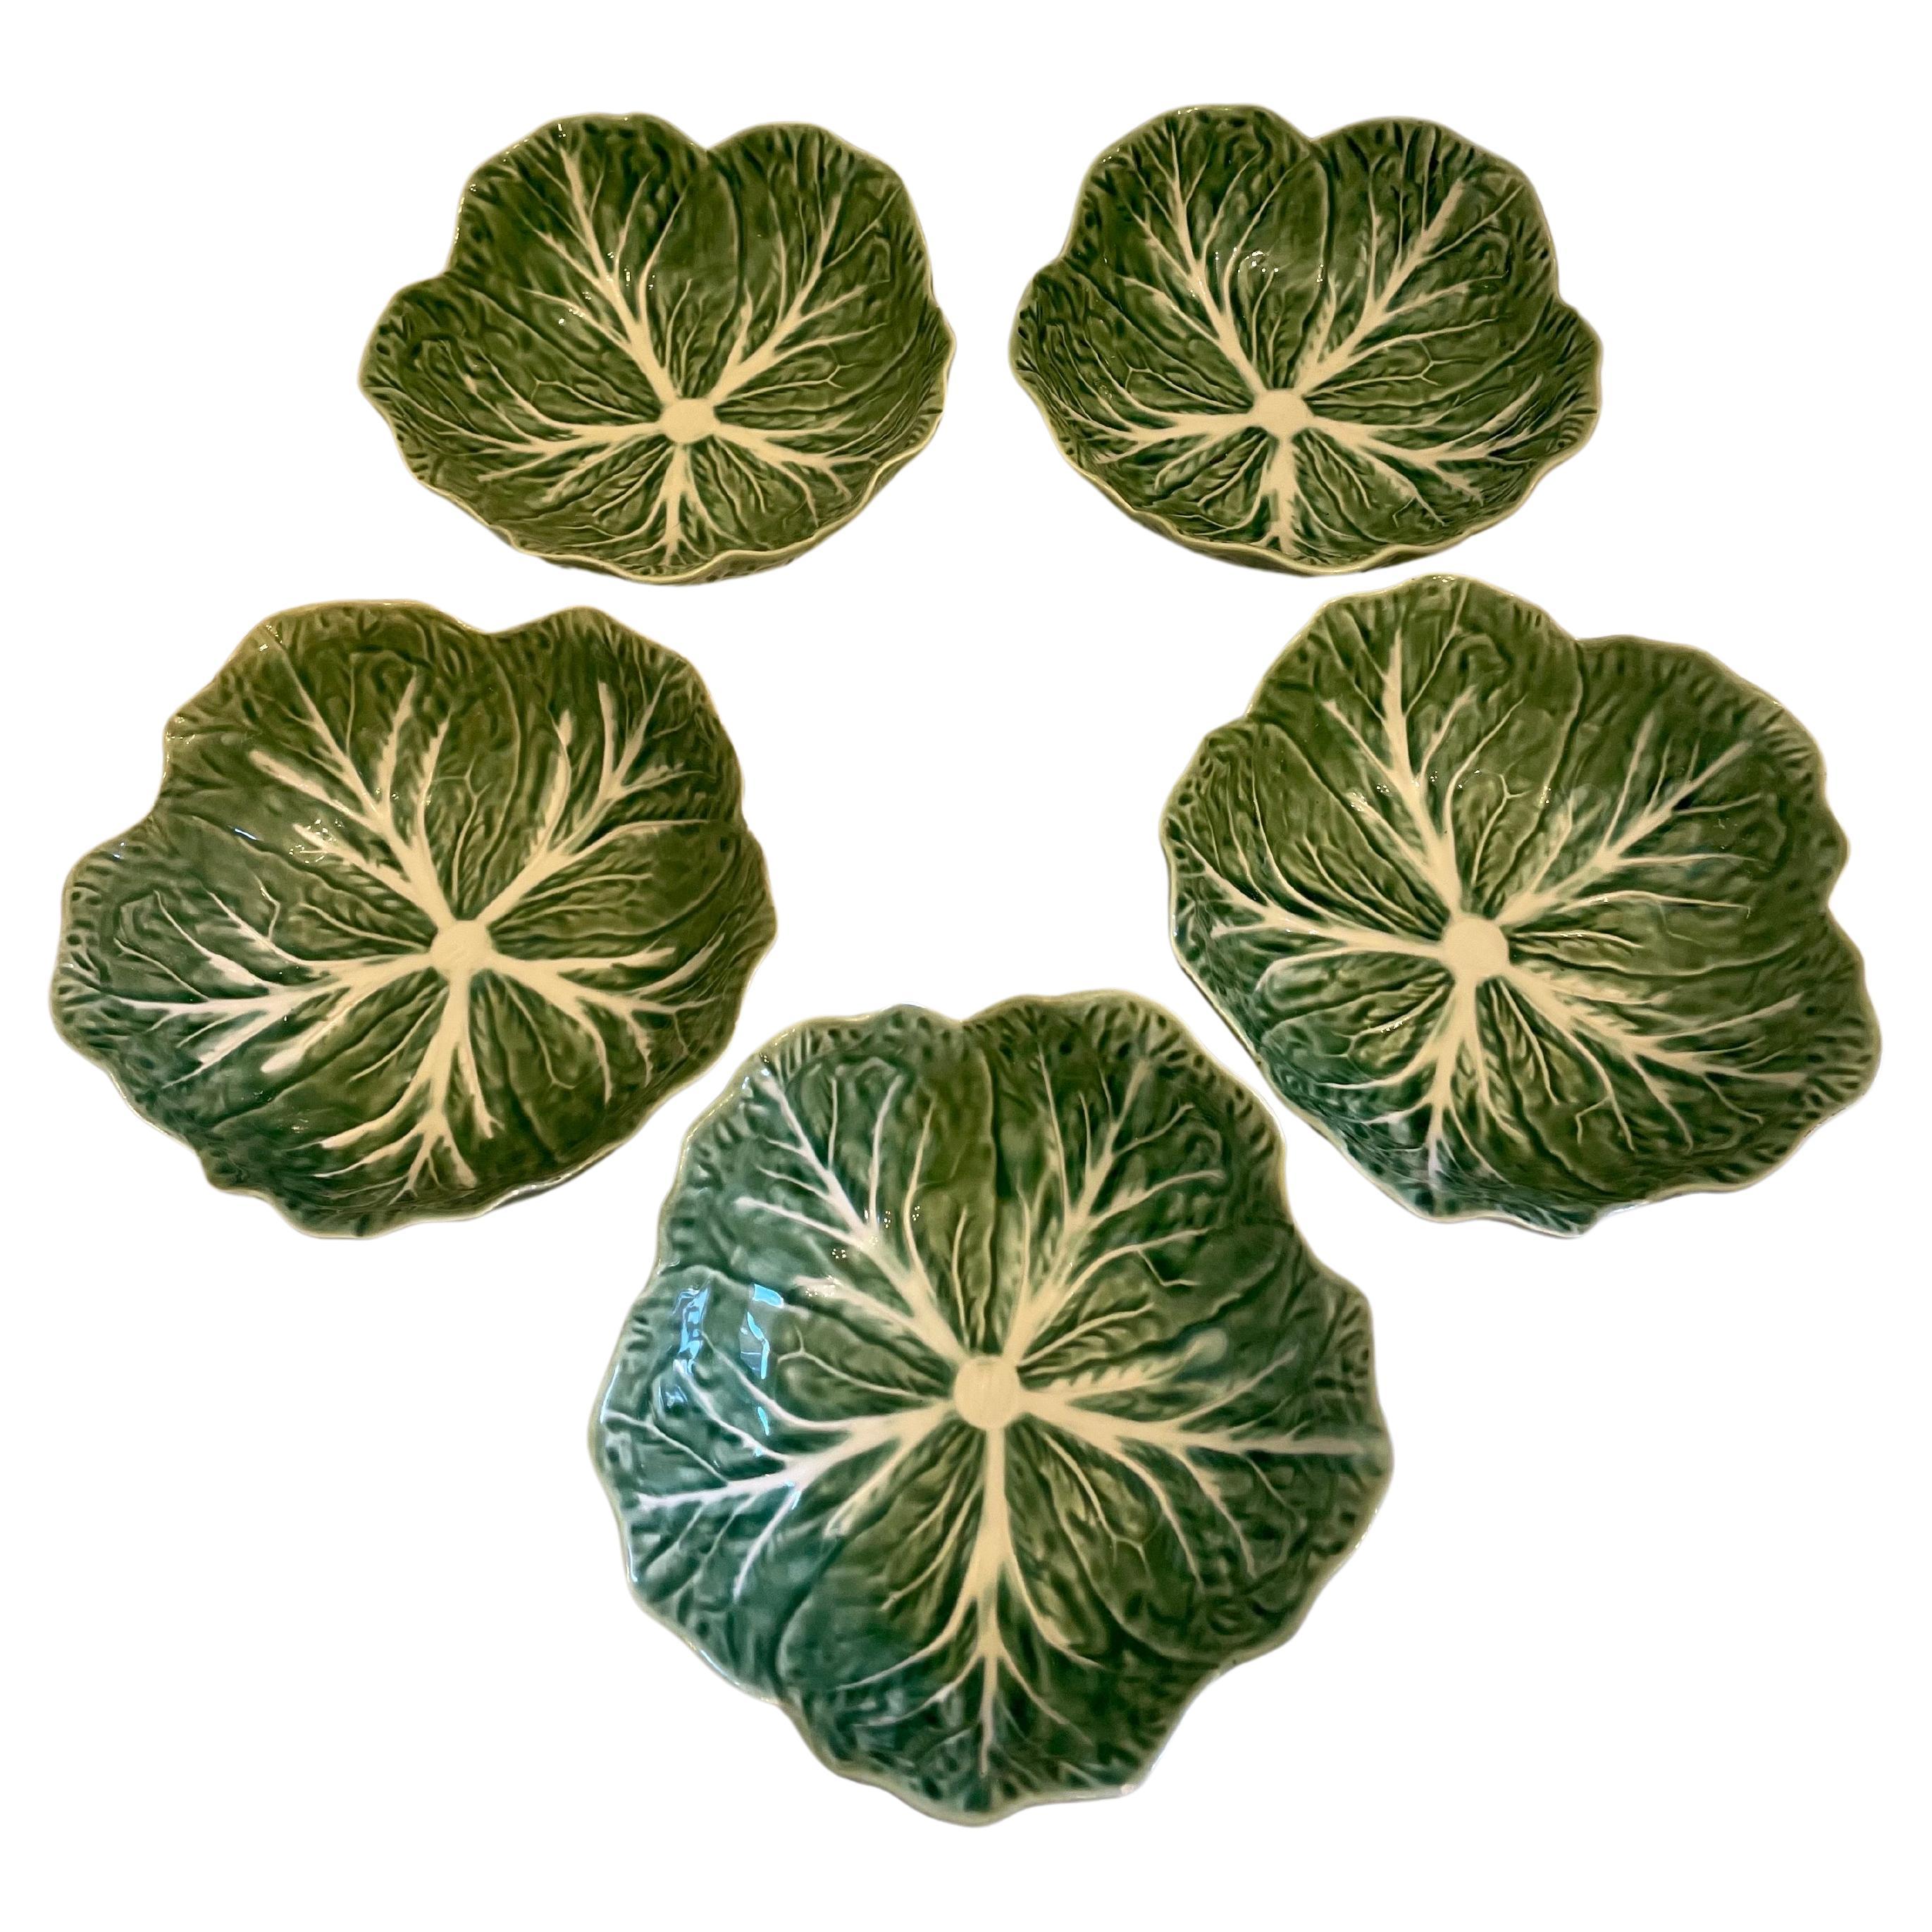  Set Of Five Cabbage Pattern Bowls by Bordallo Pinheiro, Portugal